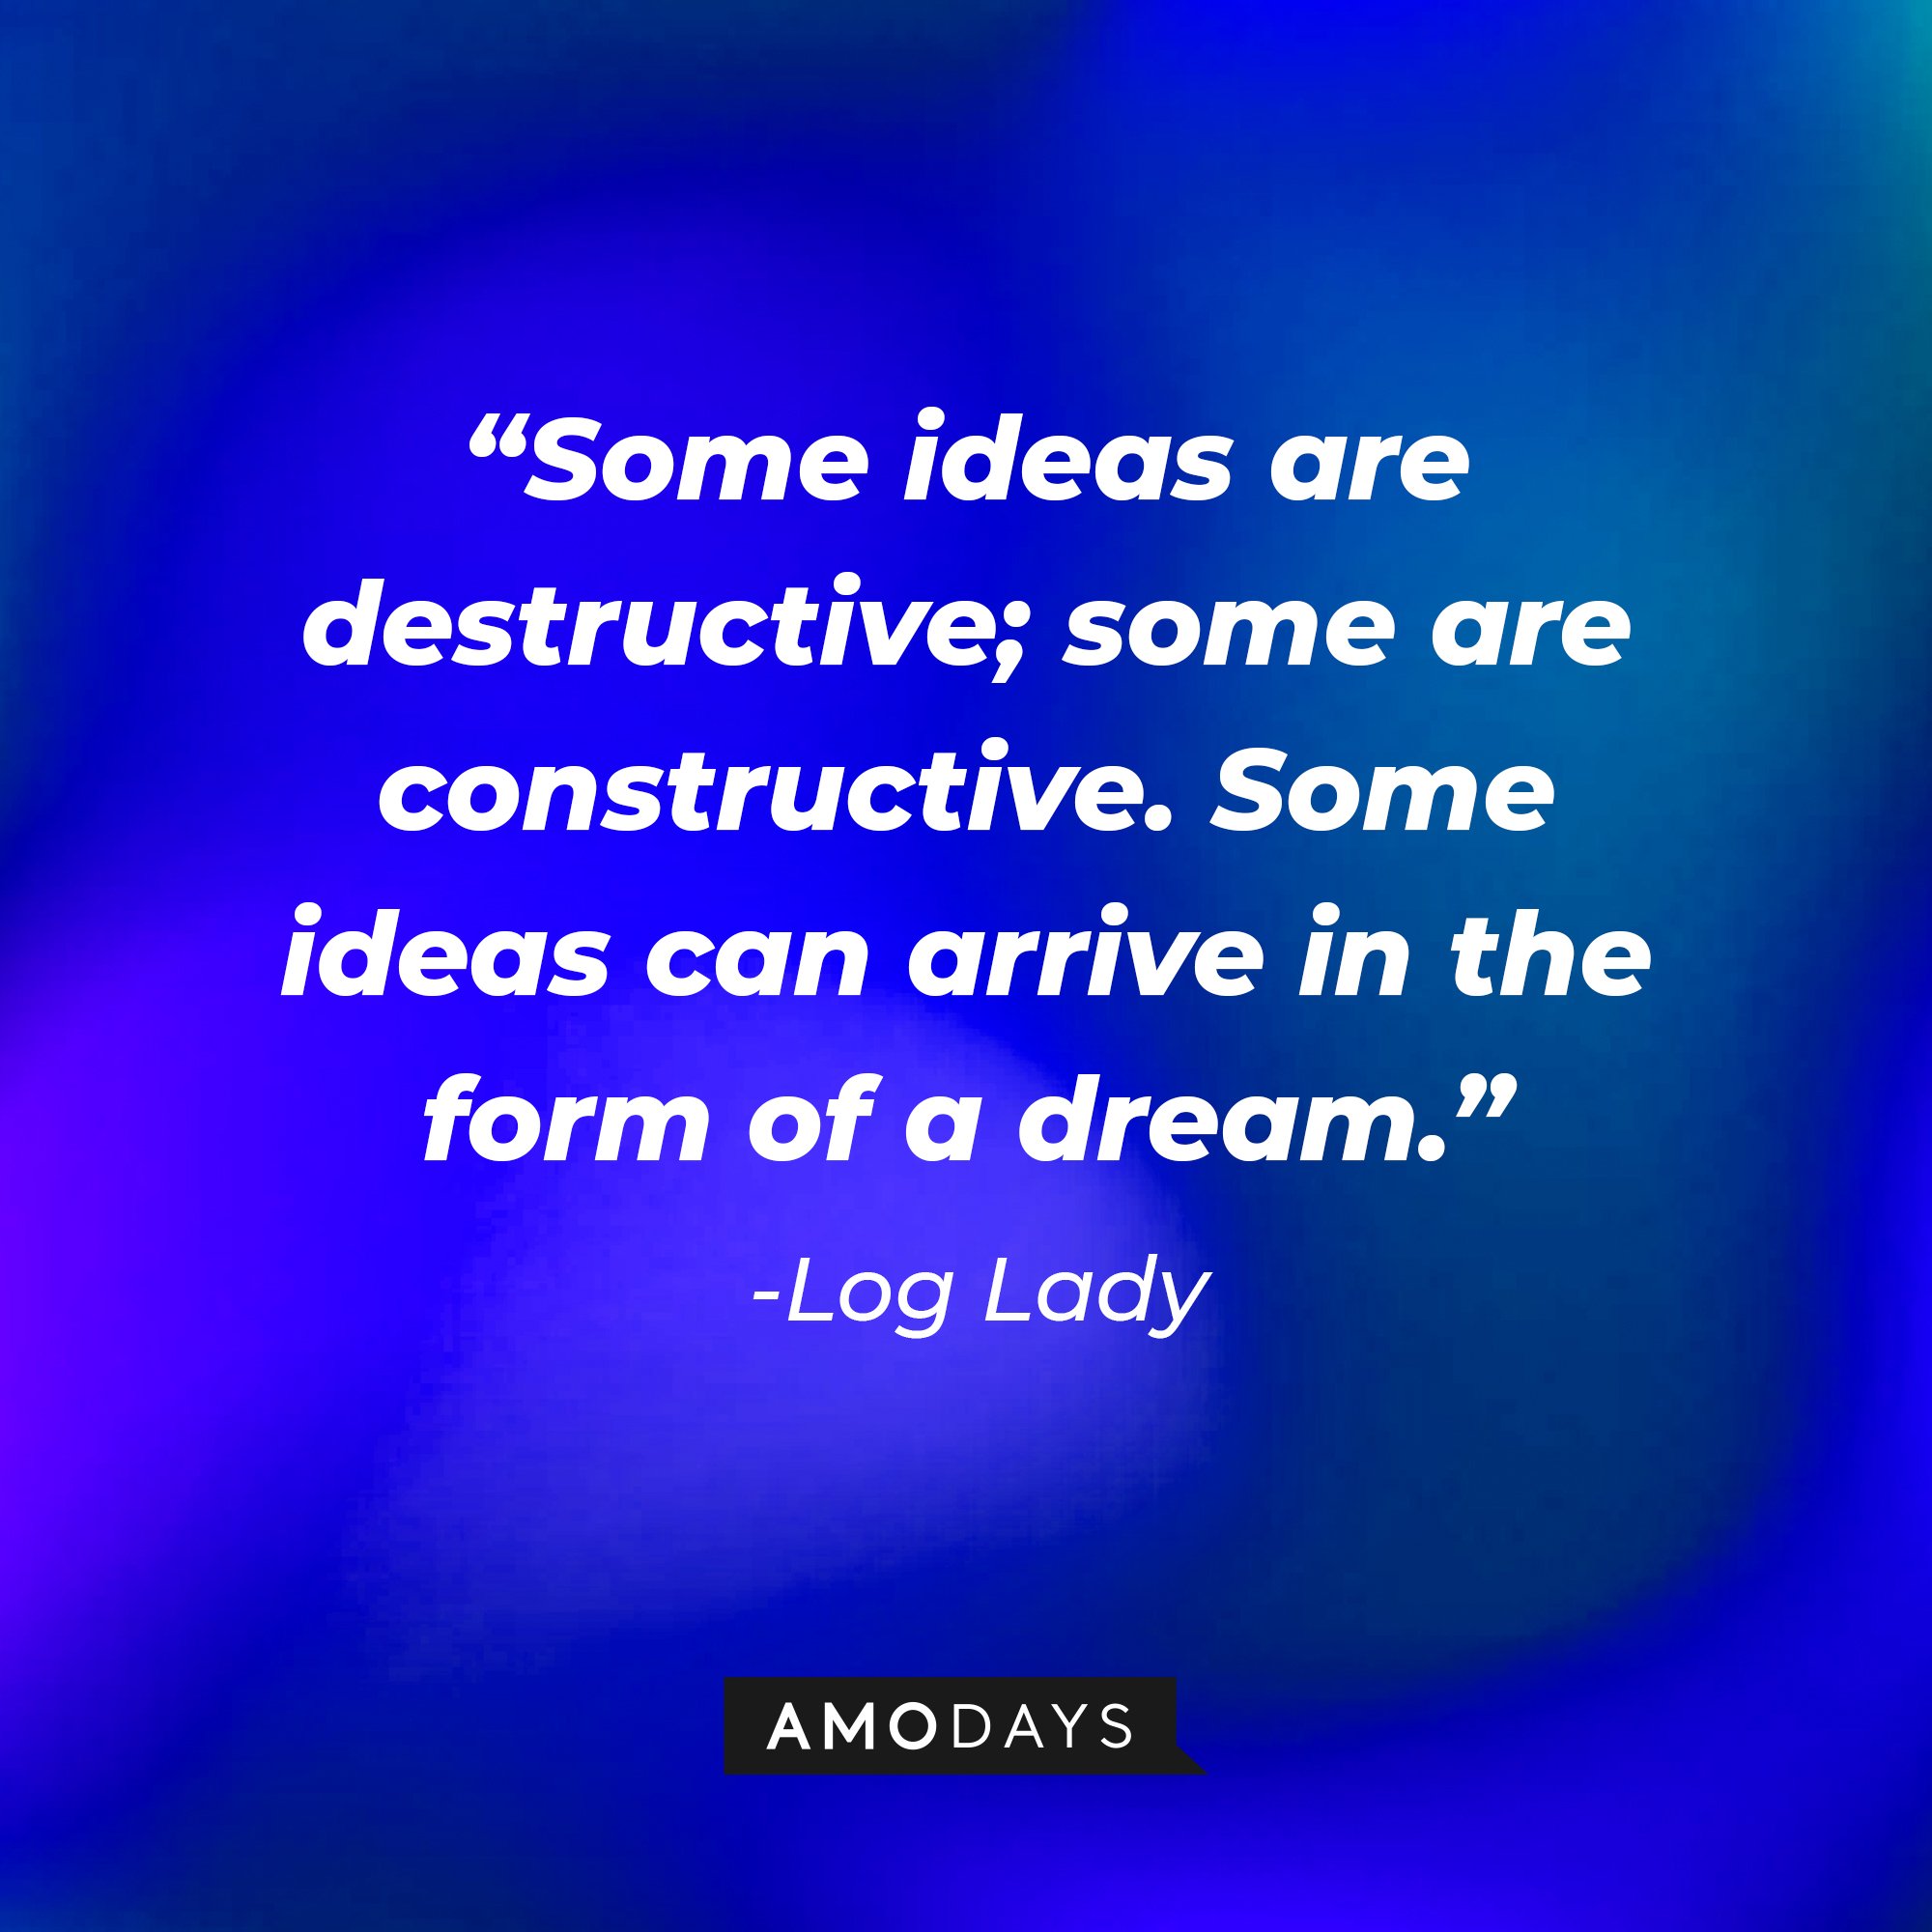 Log Lady’s quote: "Some ideas are destructive; some are constructive. Some ideas can arrive in the form of a dream."  | Image: AmoDays